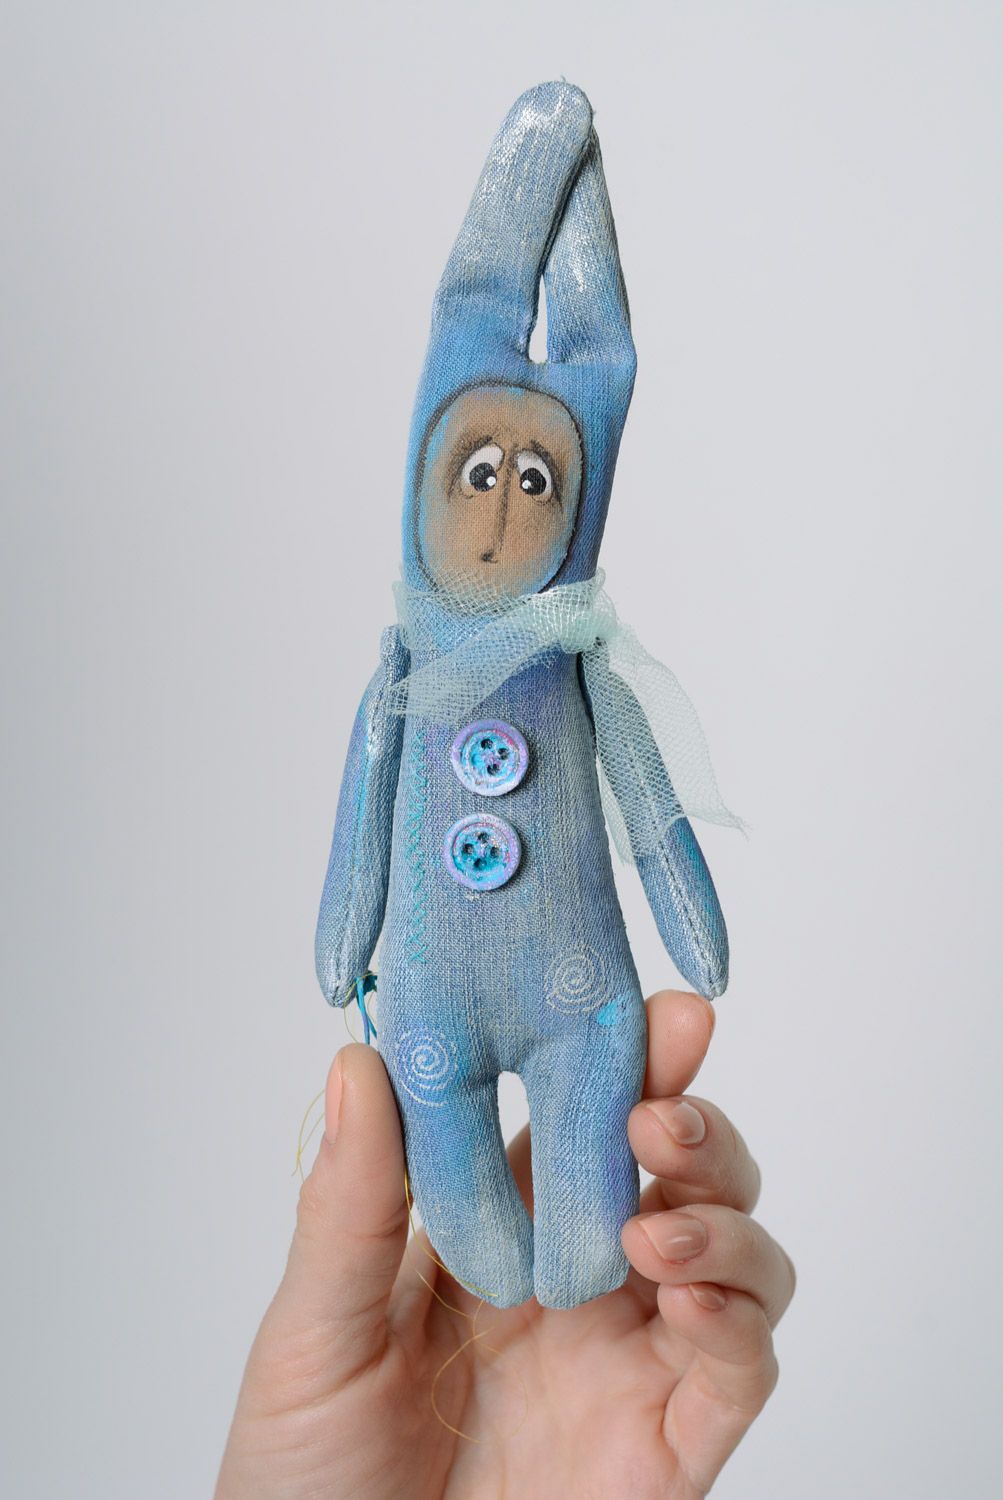 Handmade designer soft toy sewn of denim fabric and painted with acrylics photo 3